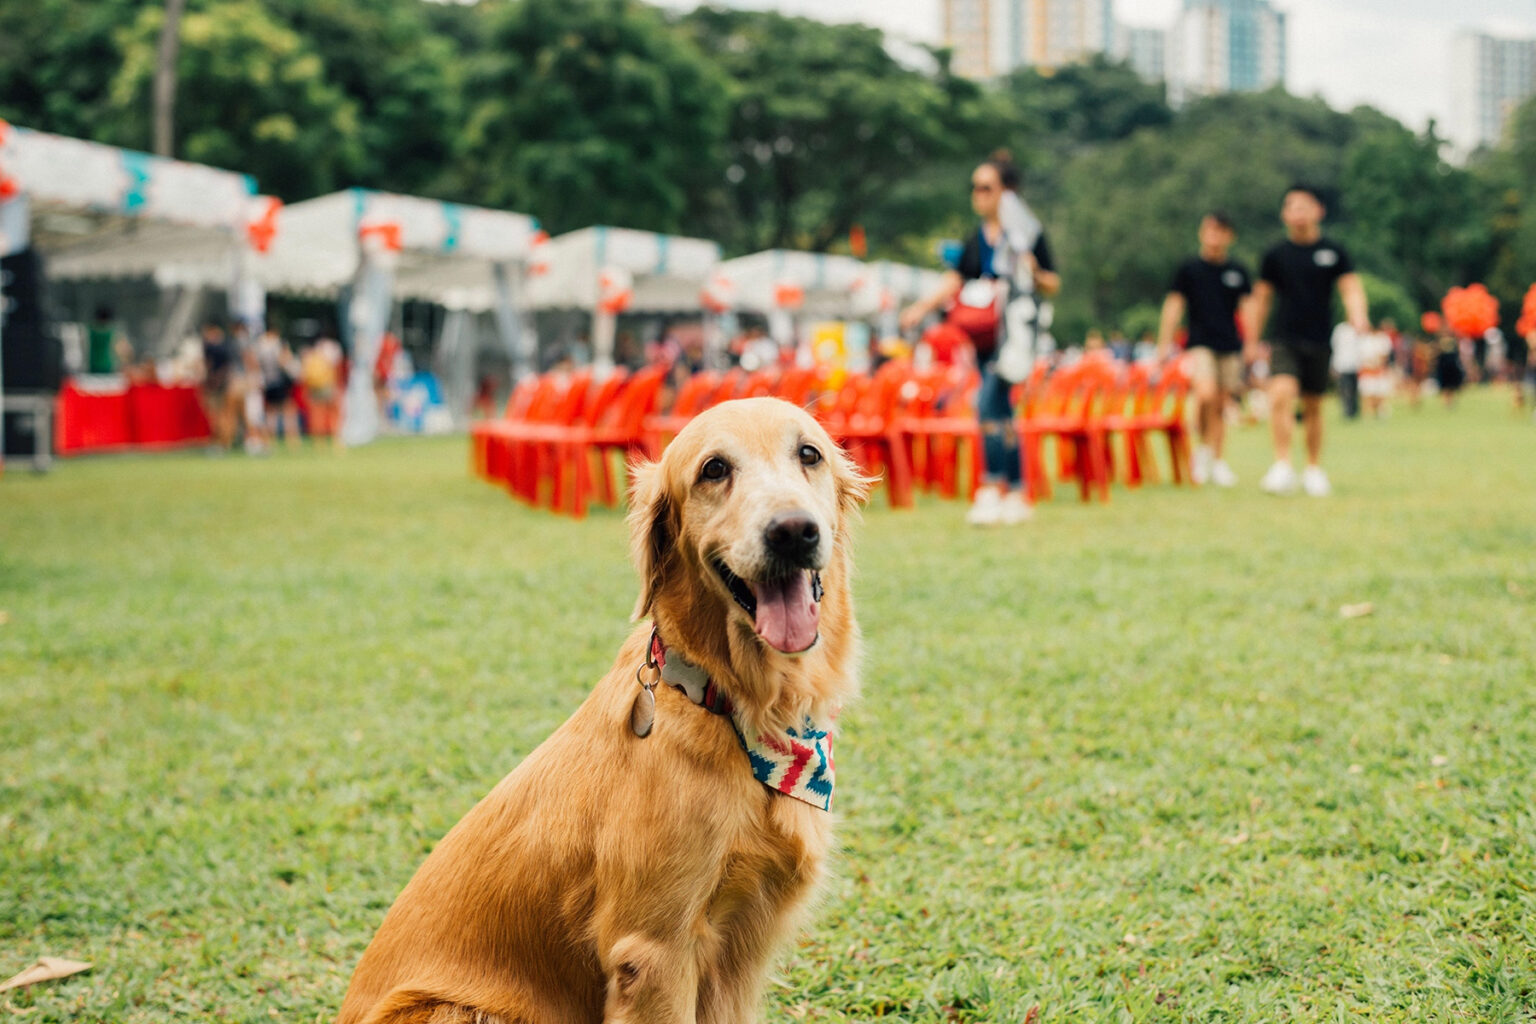 Adorable dog in a field at an event